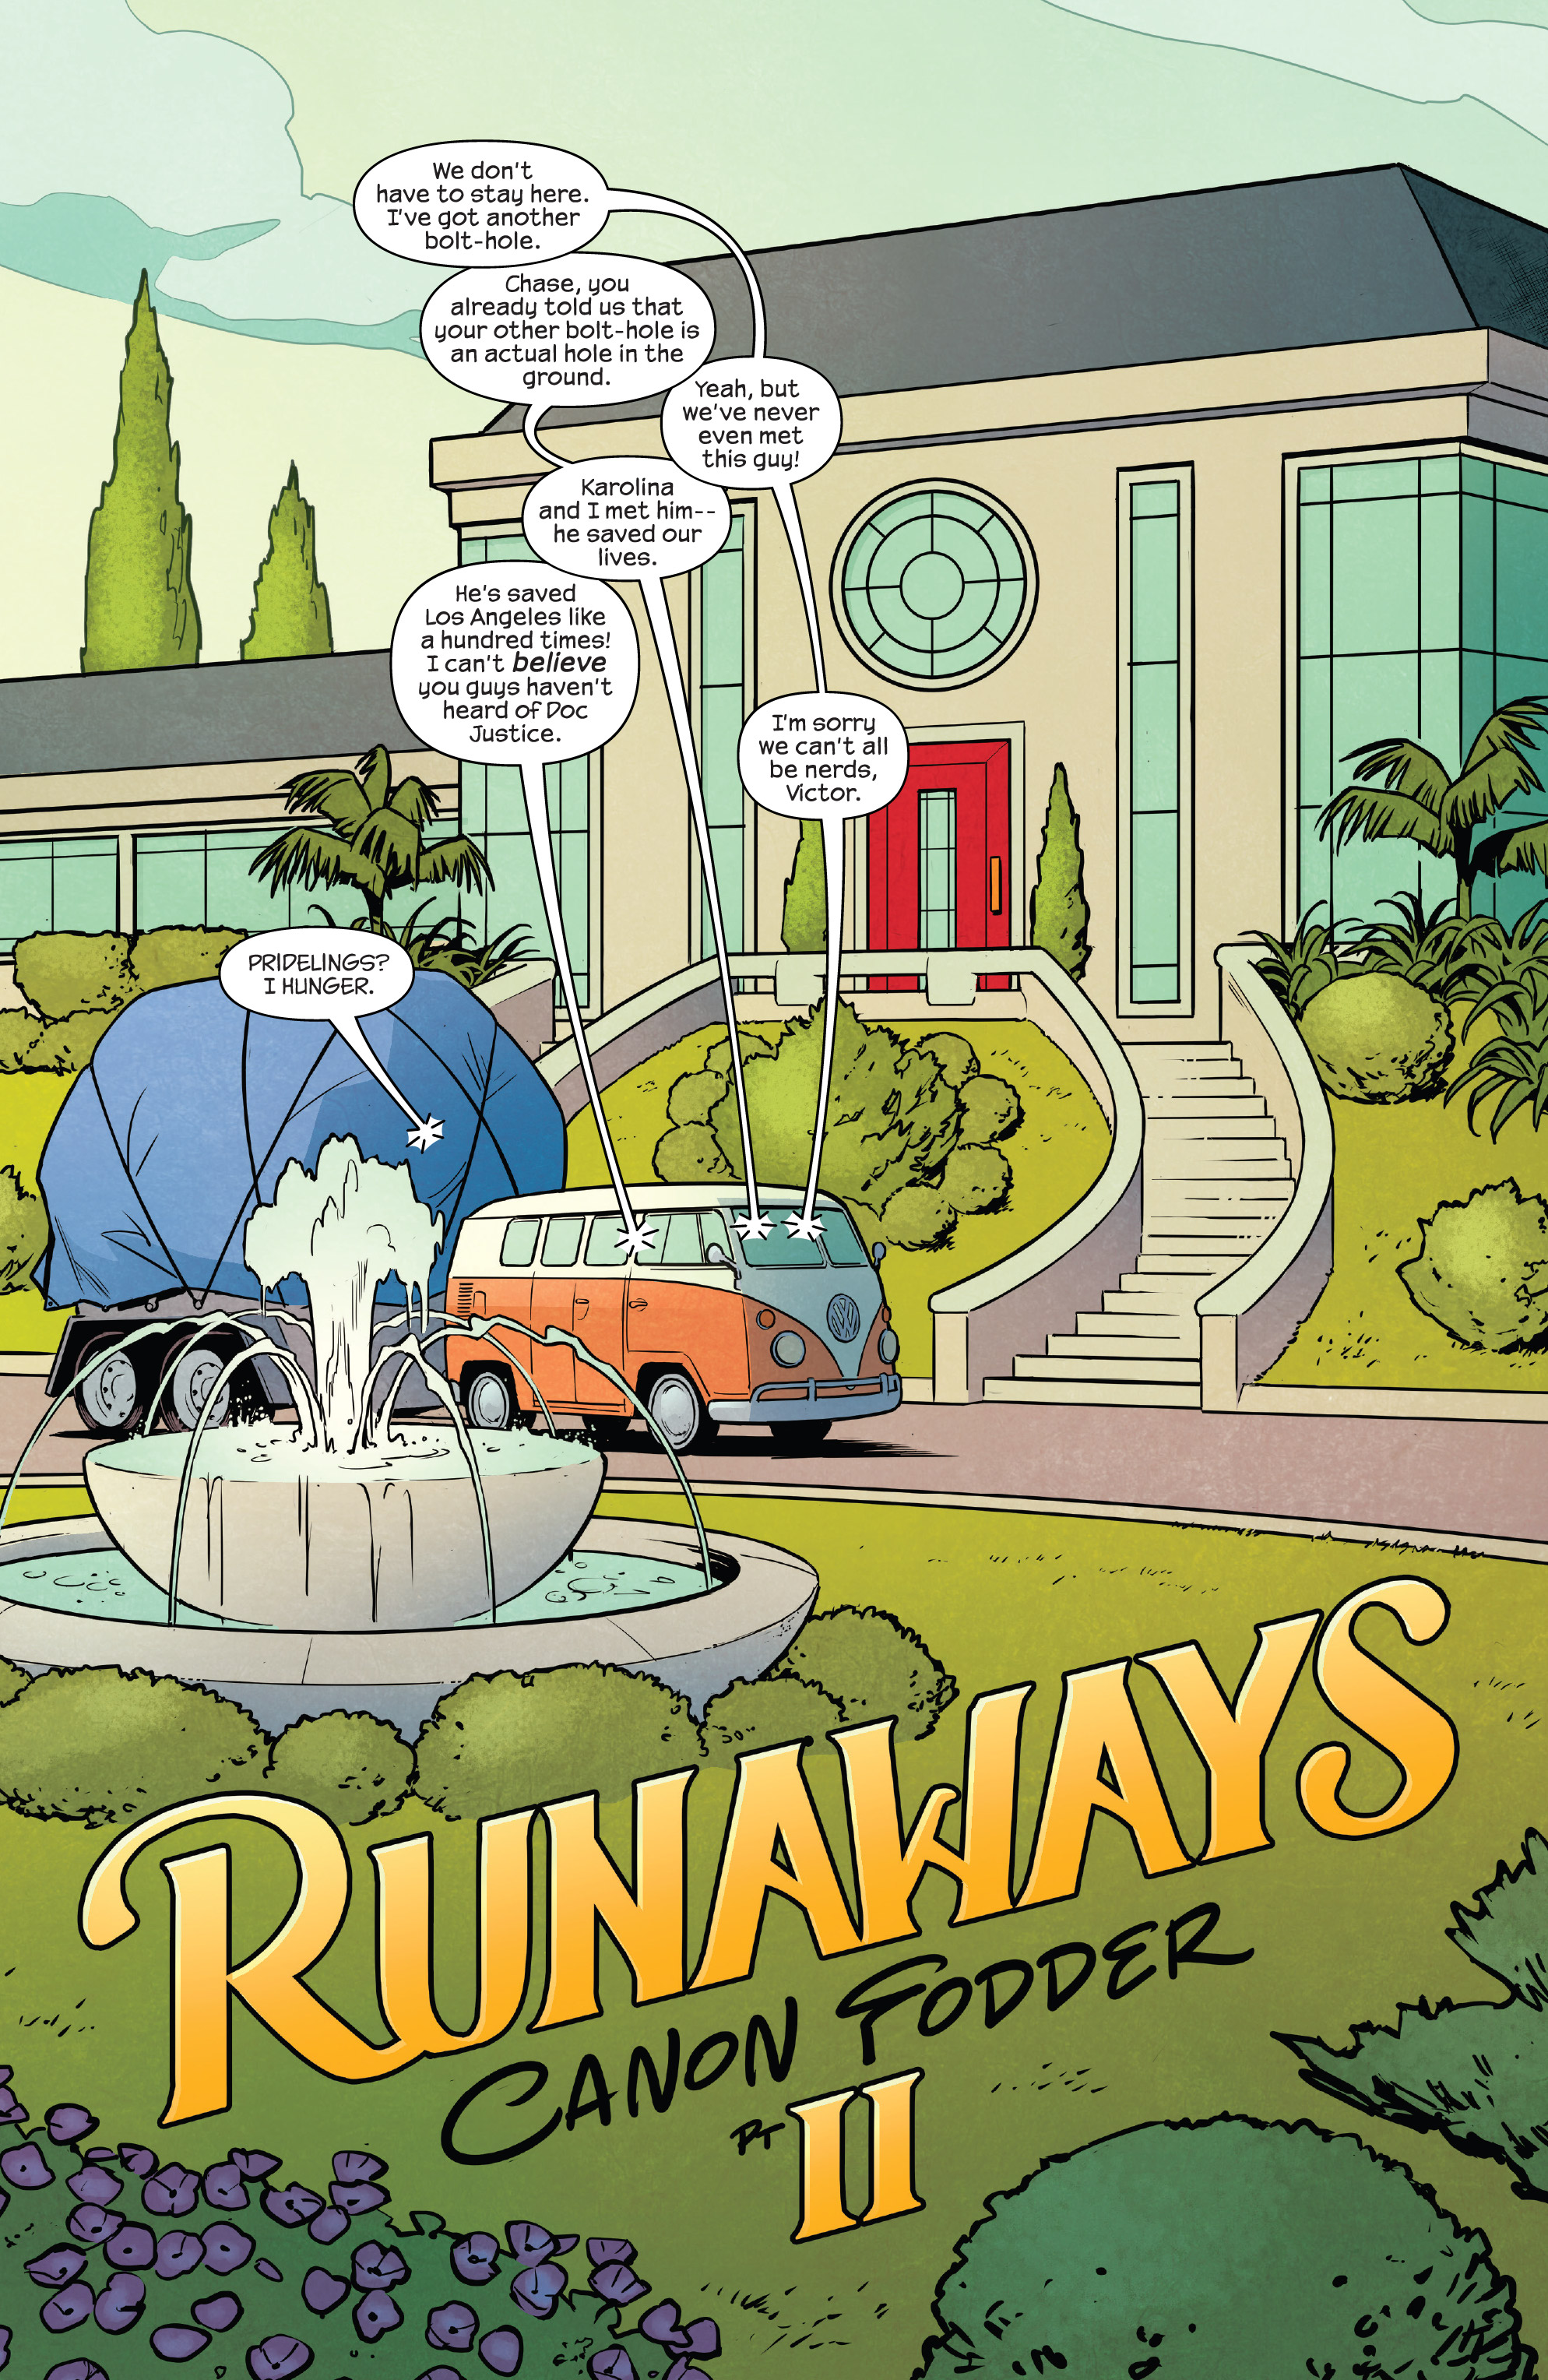 Runaways (2017-): Chapter 26 - Page 2